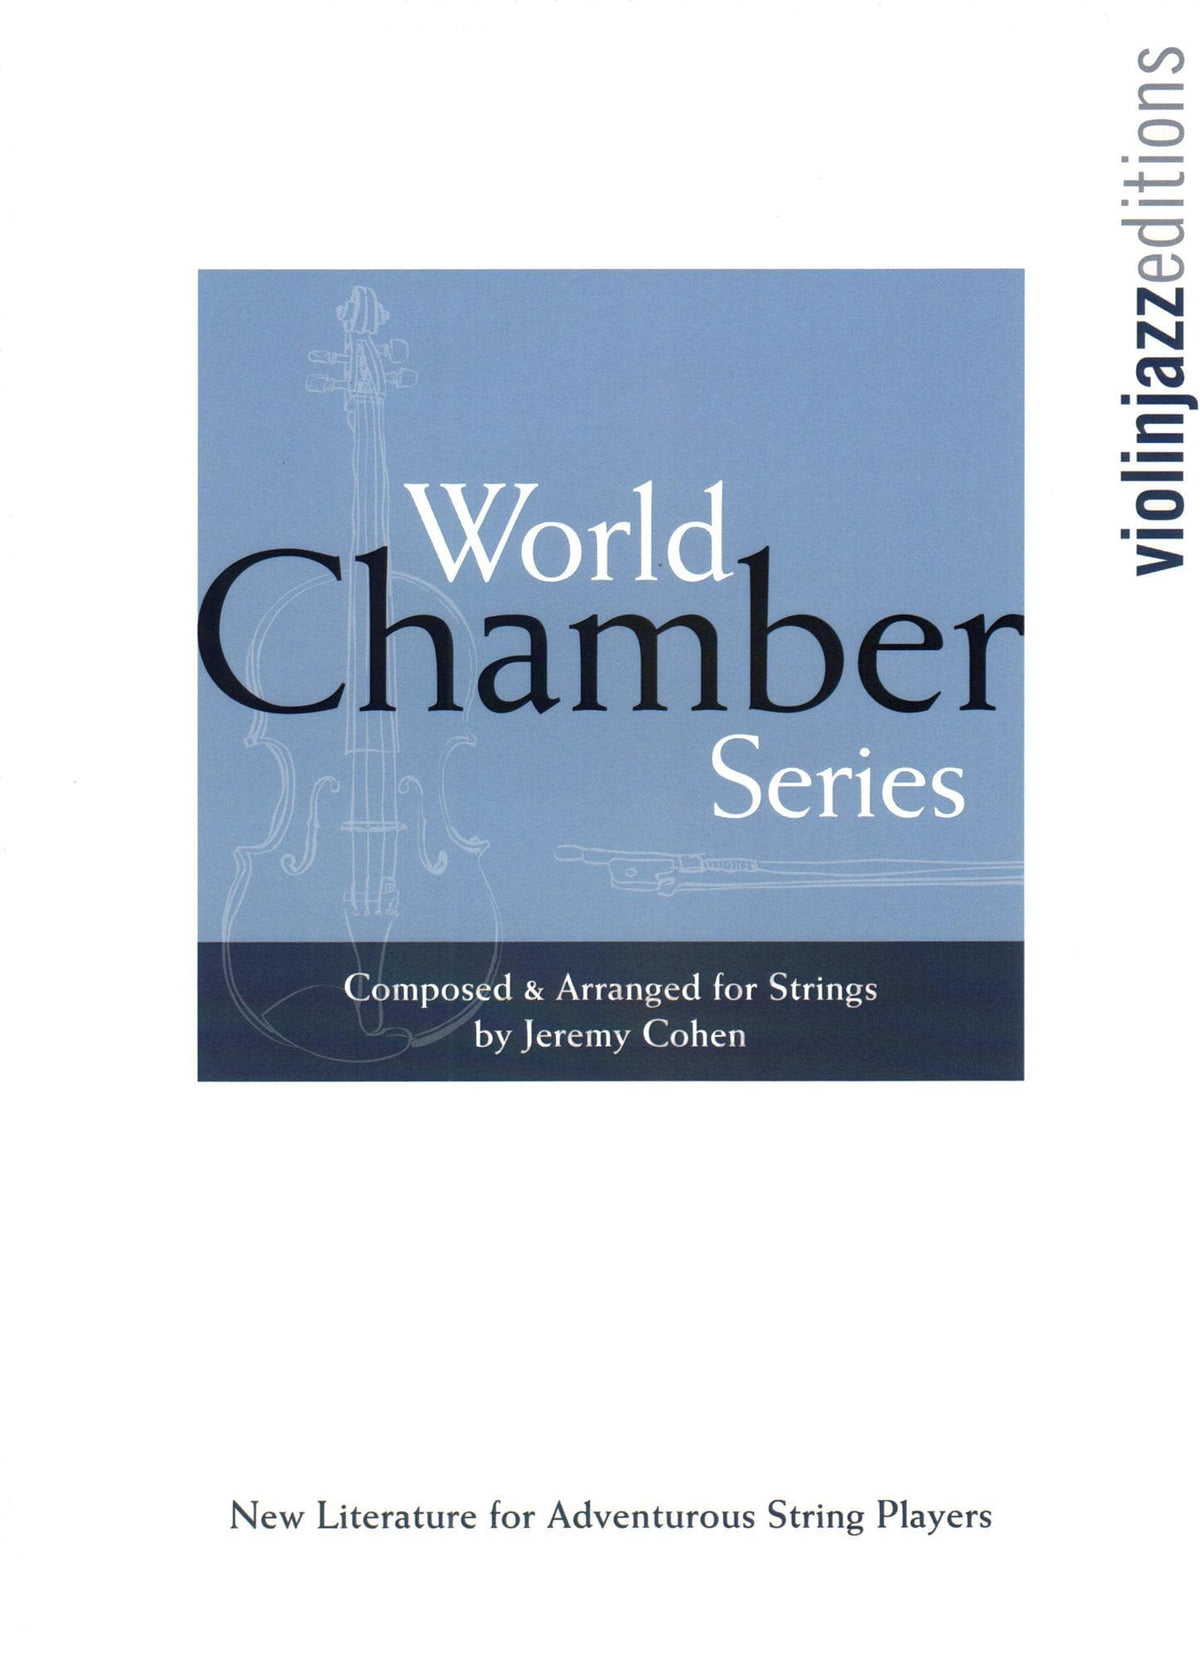 Cohen, Jeremy - Mexican Hat Dance - World Chamber Series - for String Quartet - Violinjazz Editions